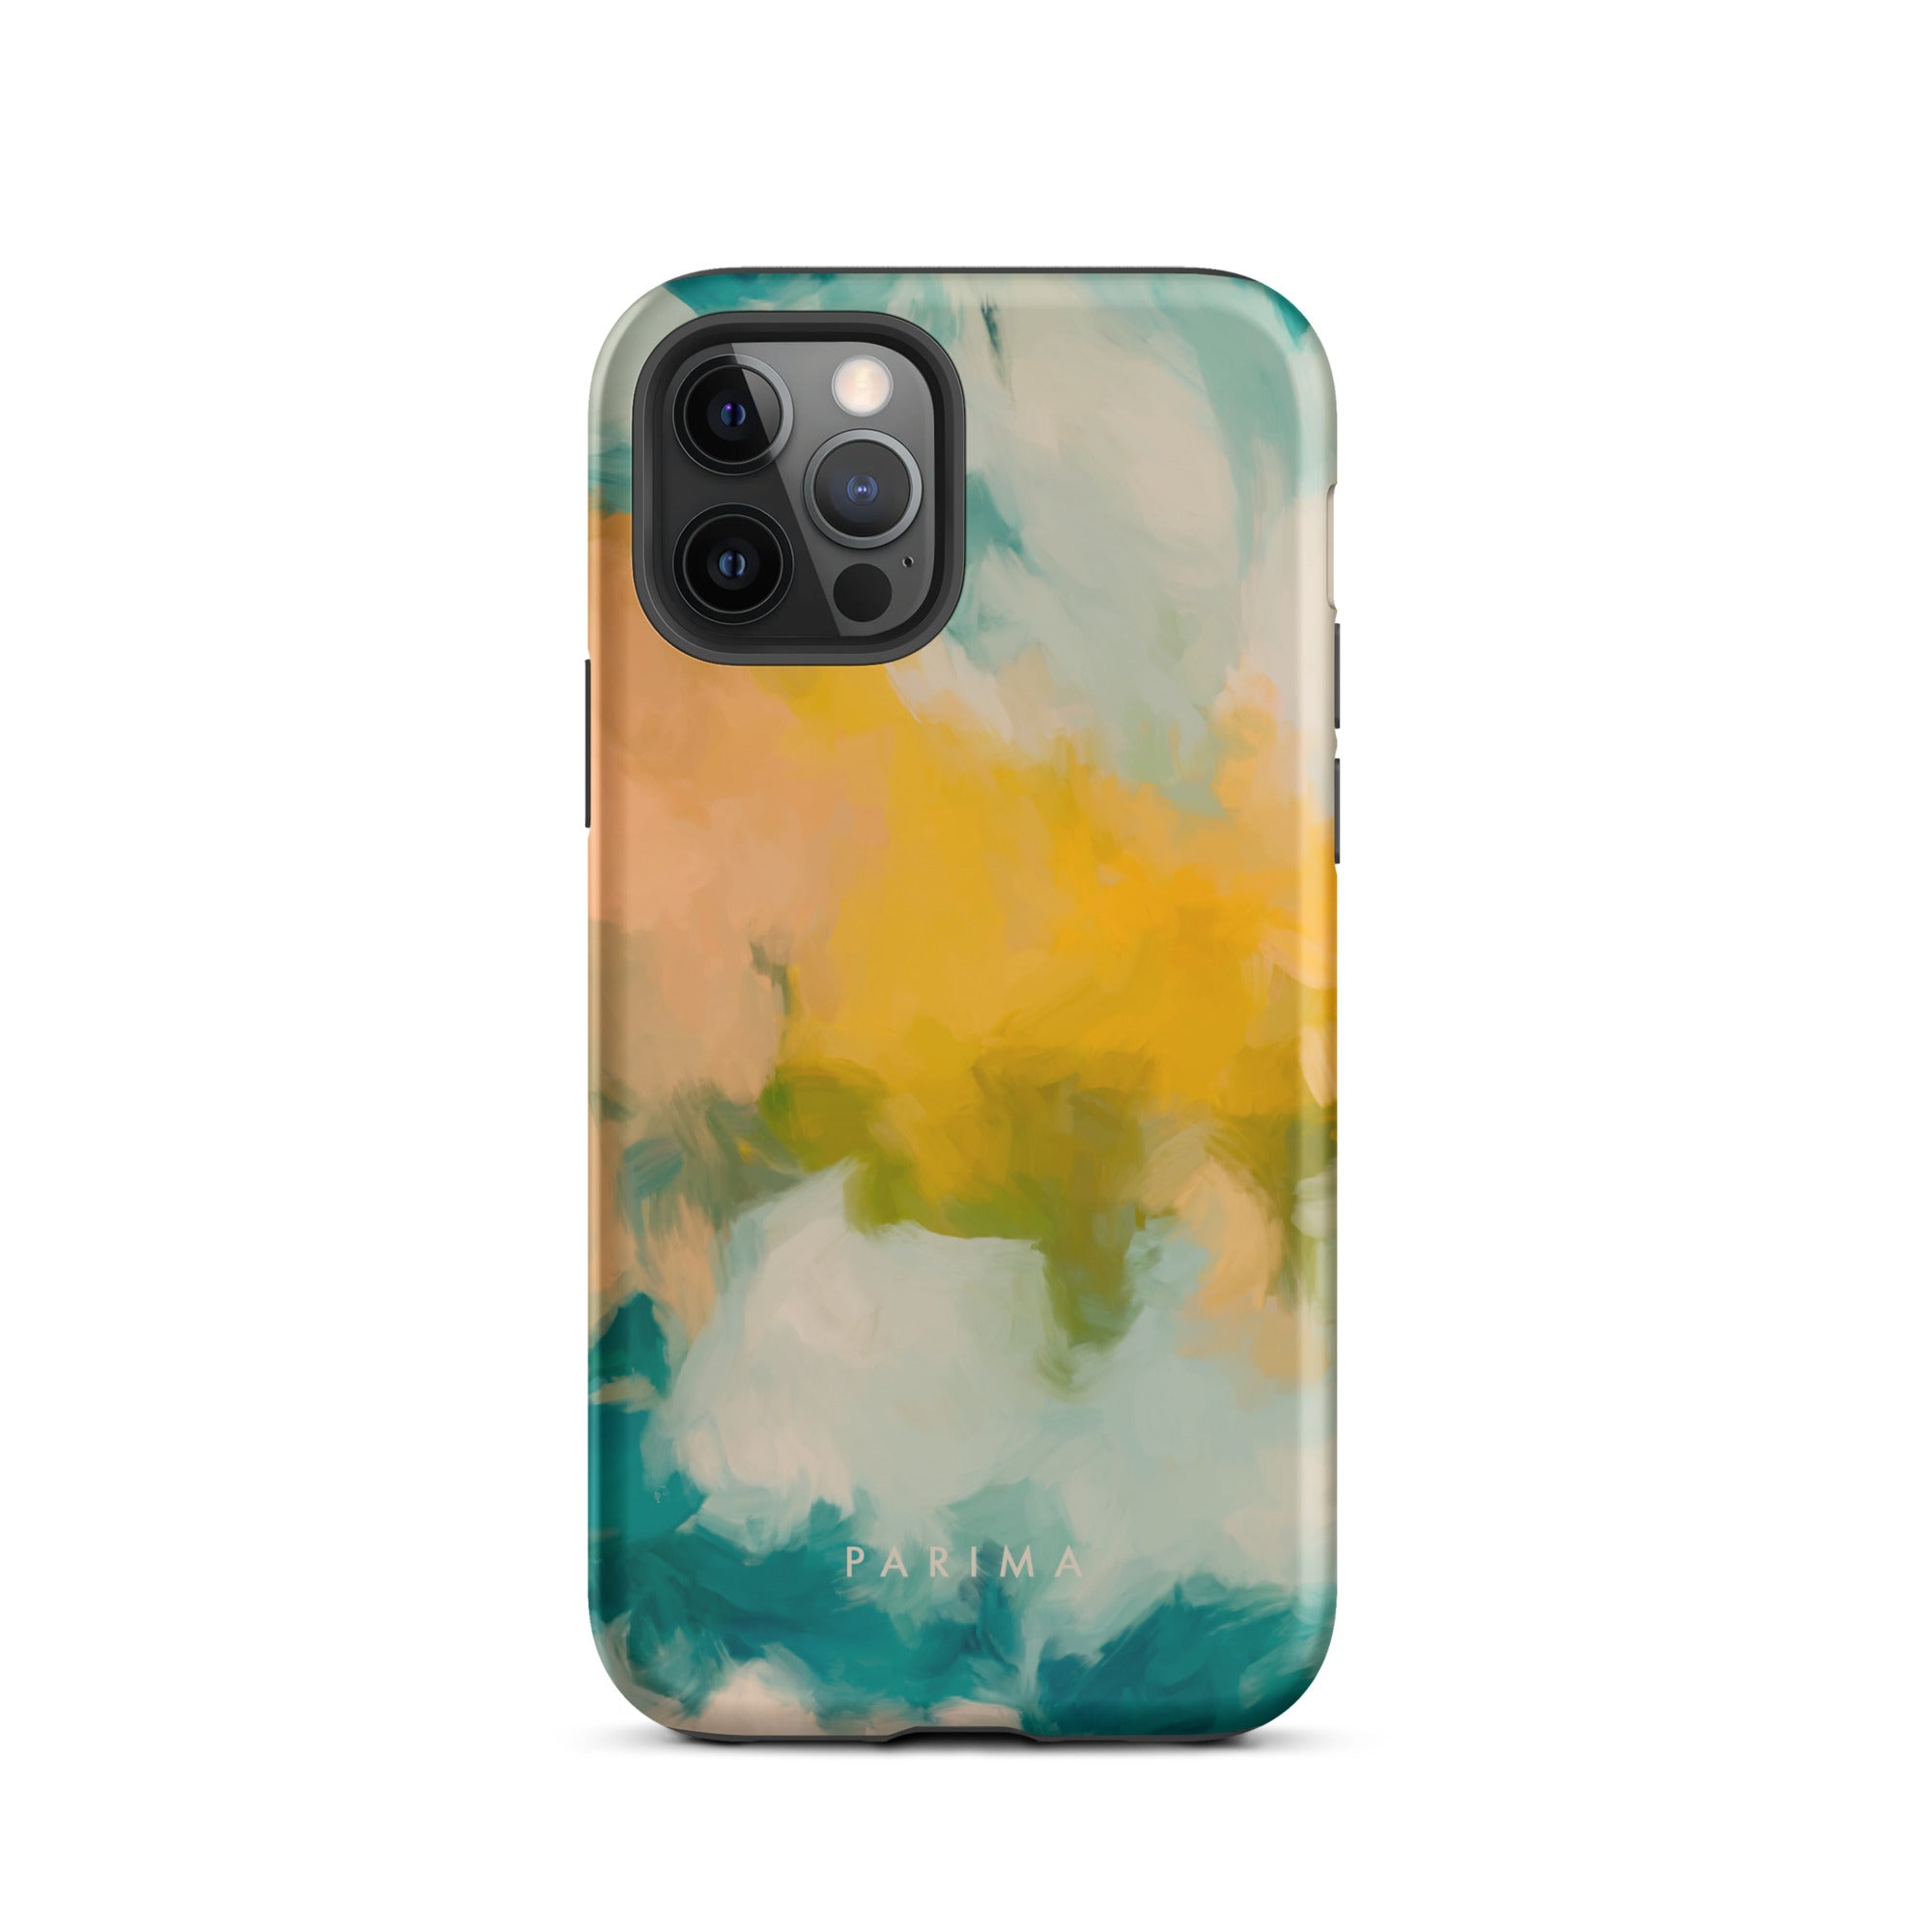 Beach Day, blue and yellow abstract art - iPhone 12 Pro tough case by Parima Studio